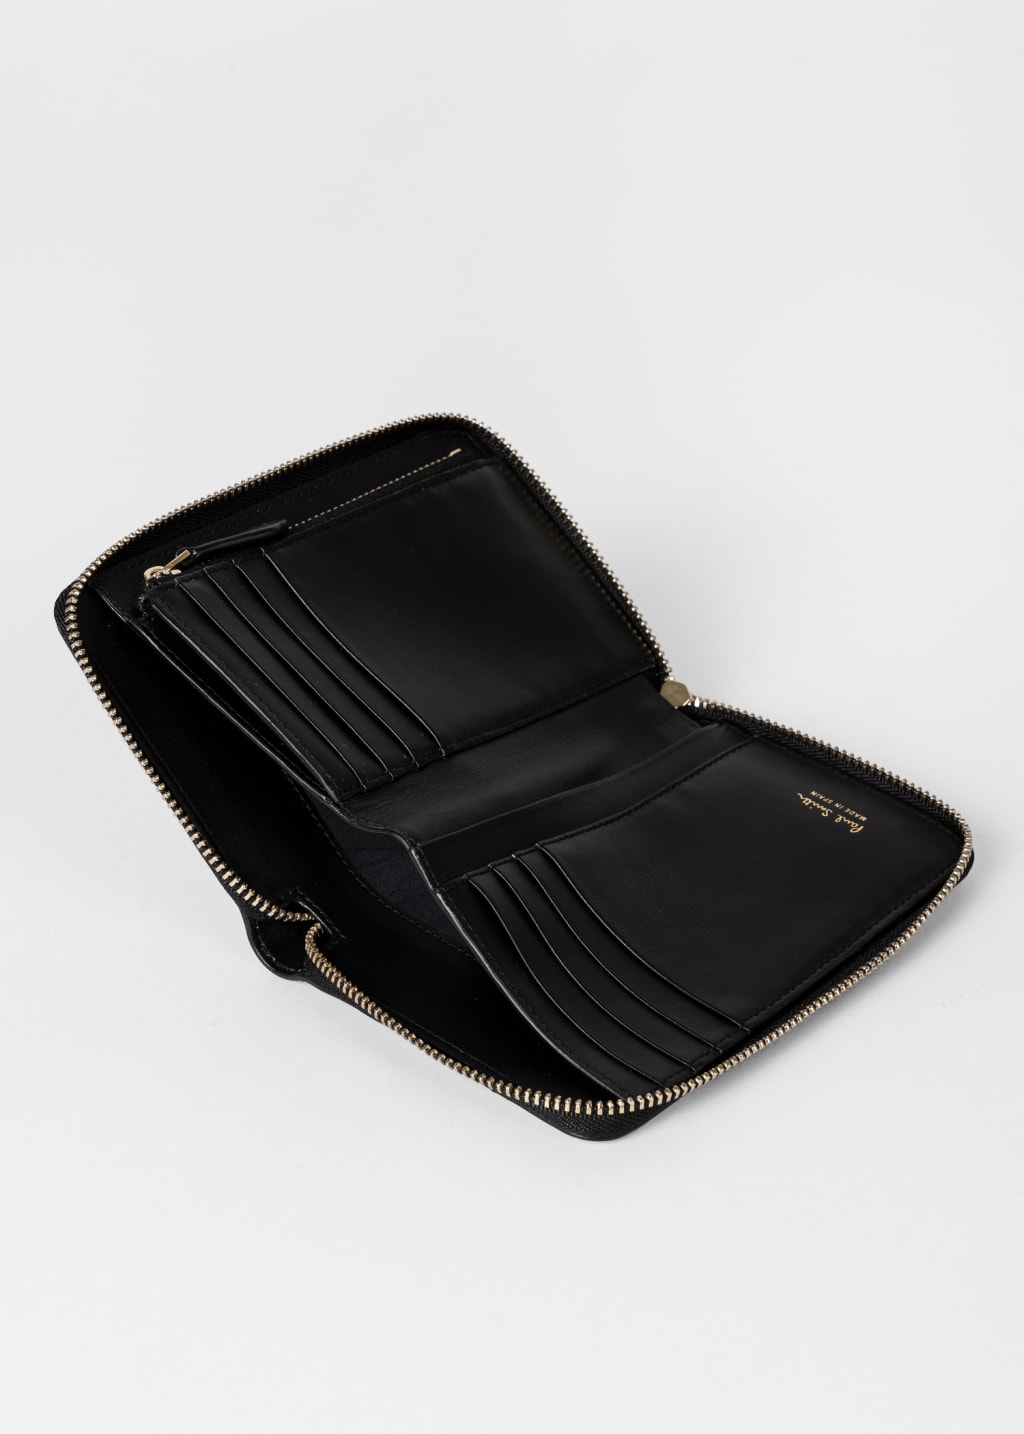 Product View - Leather 'Signature Stripe' Zip-Around Purse by Paul Smith